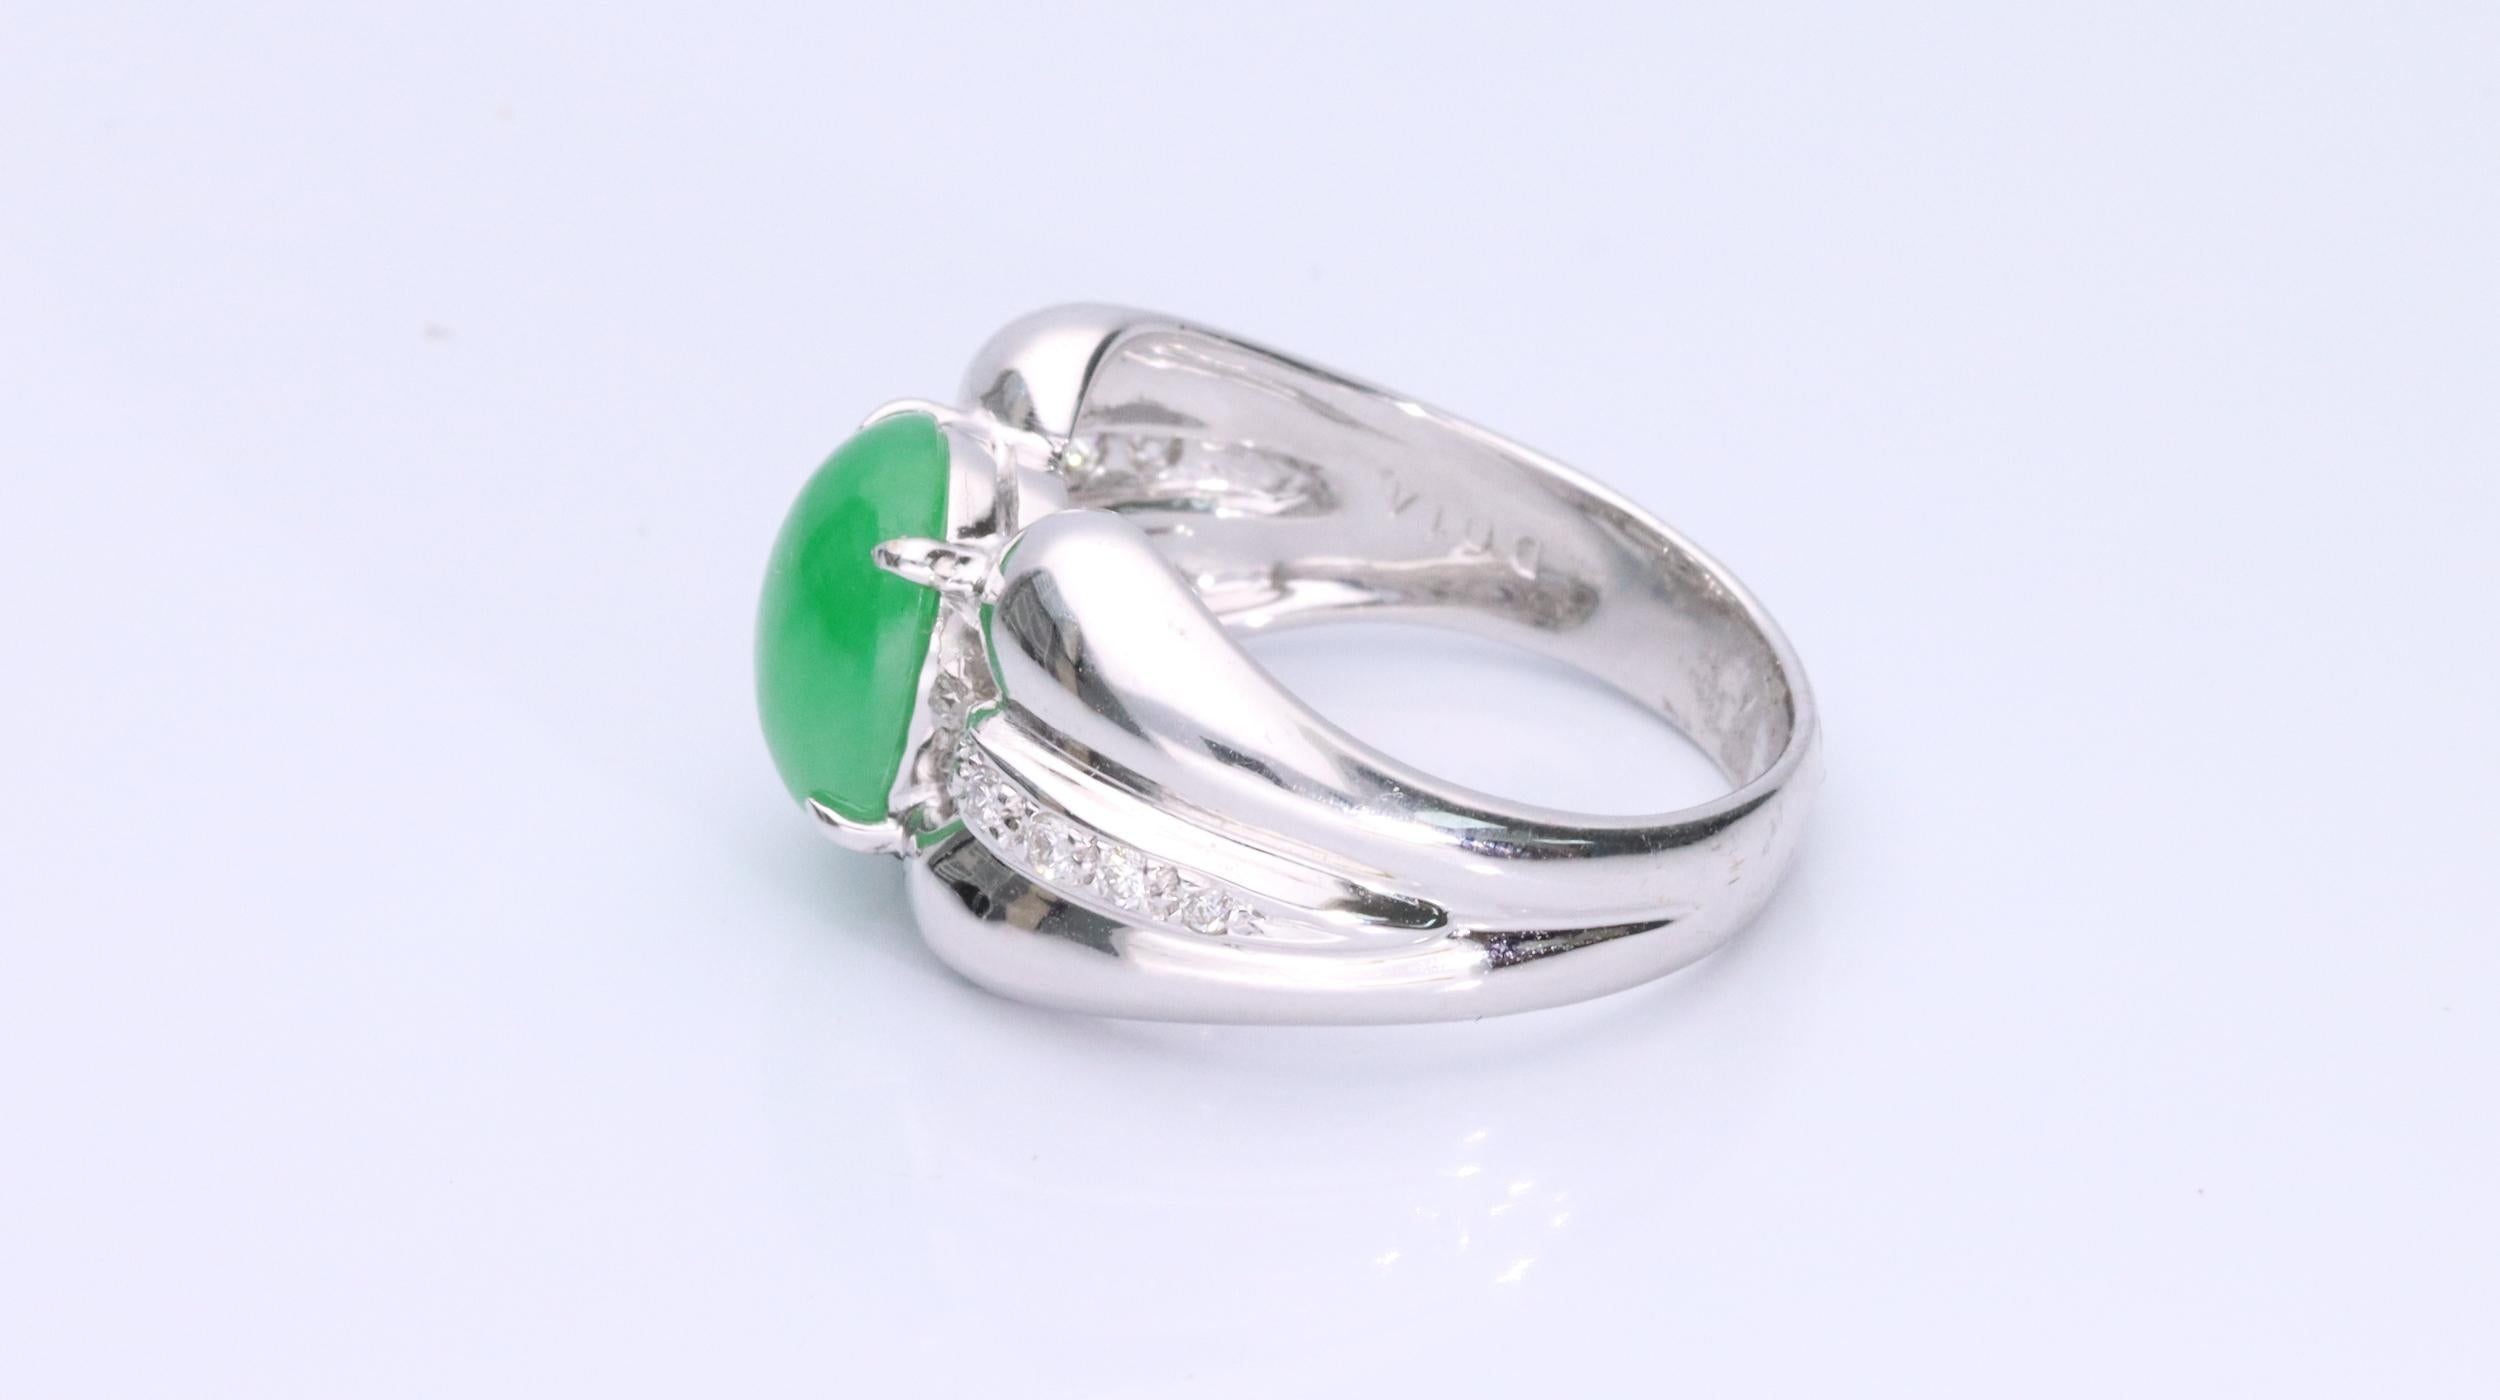 Decorate yourself in elegance with this Ring is crafted from 18-karat White Gold by Gin & Grace. This Ring is made up of Oval-Cab (1 pcs) 3.10 carat Jade and Round-cut White Diamond (10 Pcs) 0.14 carat. This Ring is weight 7.39 grams. This delicate